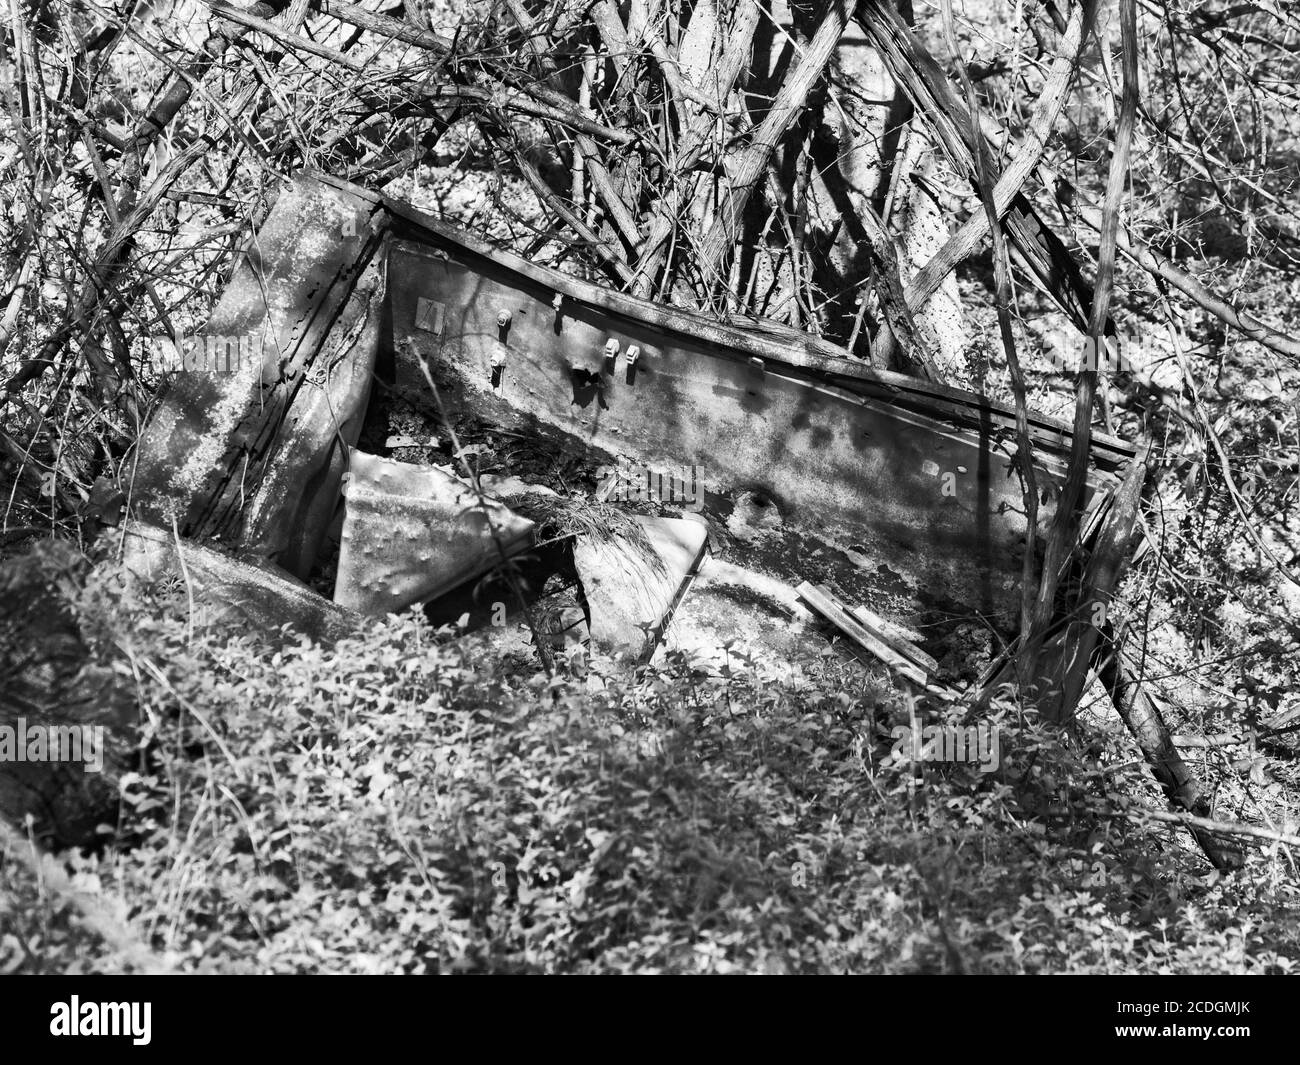 The Woodlands TX USA - 02-07-2020  -  Old Rusted Refrigerator a Flooded 2 in B&W Stock Photo